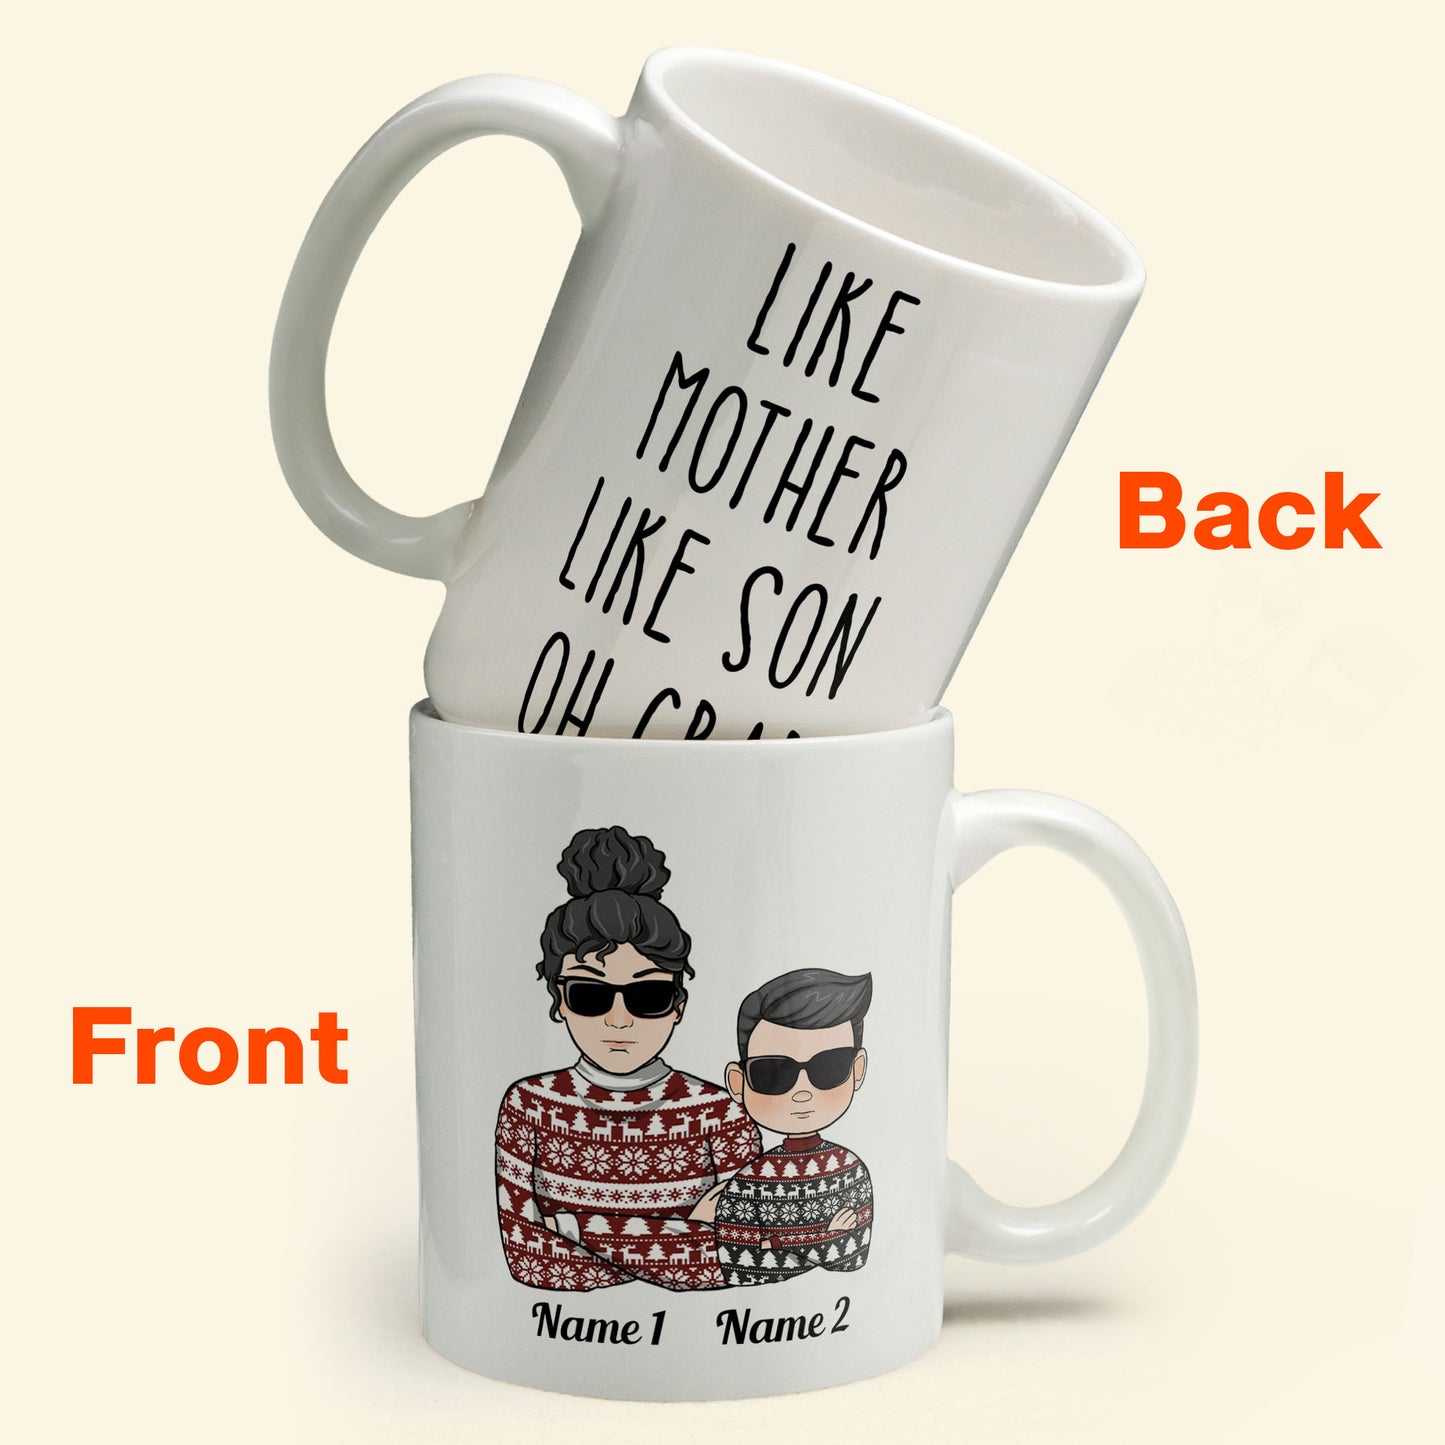 https://macorner.co/cdn/shop/products/Like-Father-Like-Daughter-Oh-Crap-Personalized-Mug-Christmas-Gift-For-Fathers_-Mothers_-Grandpas_-Grandmas_-Sons-_-Daughters_2_687e3b56-dd59-4ef1-a4dc-5ca6979c4889.jpg?v=1636364694&width=1445